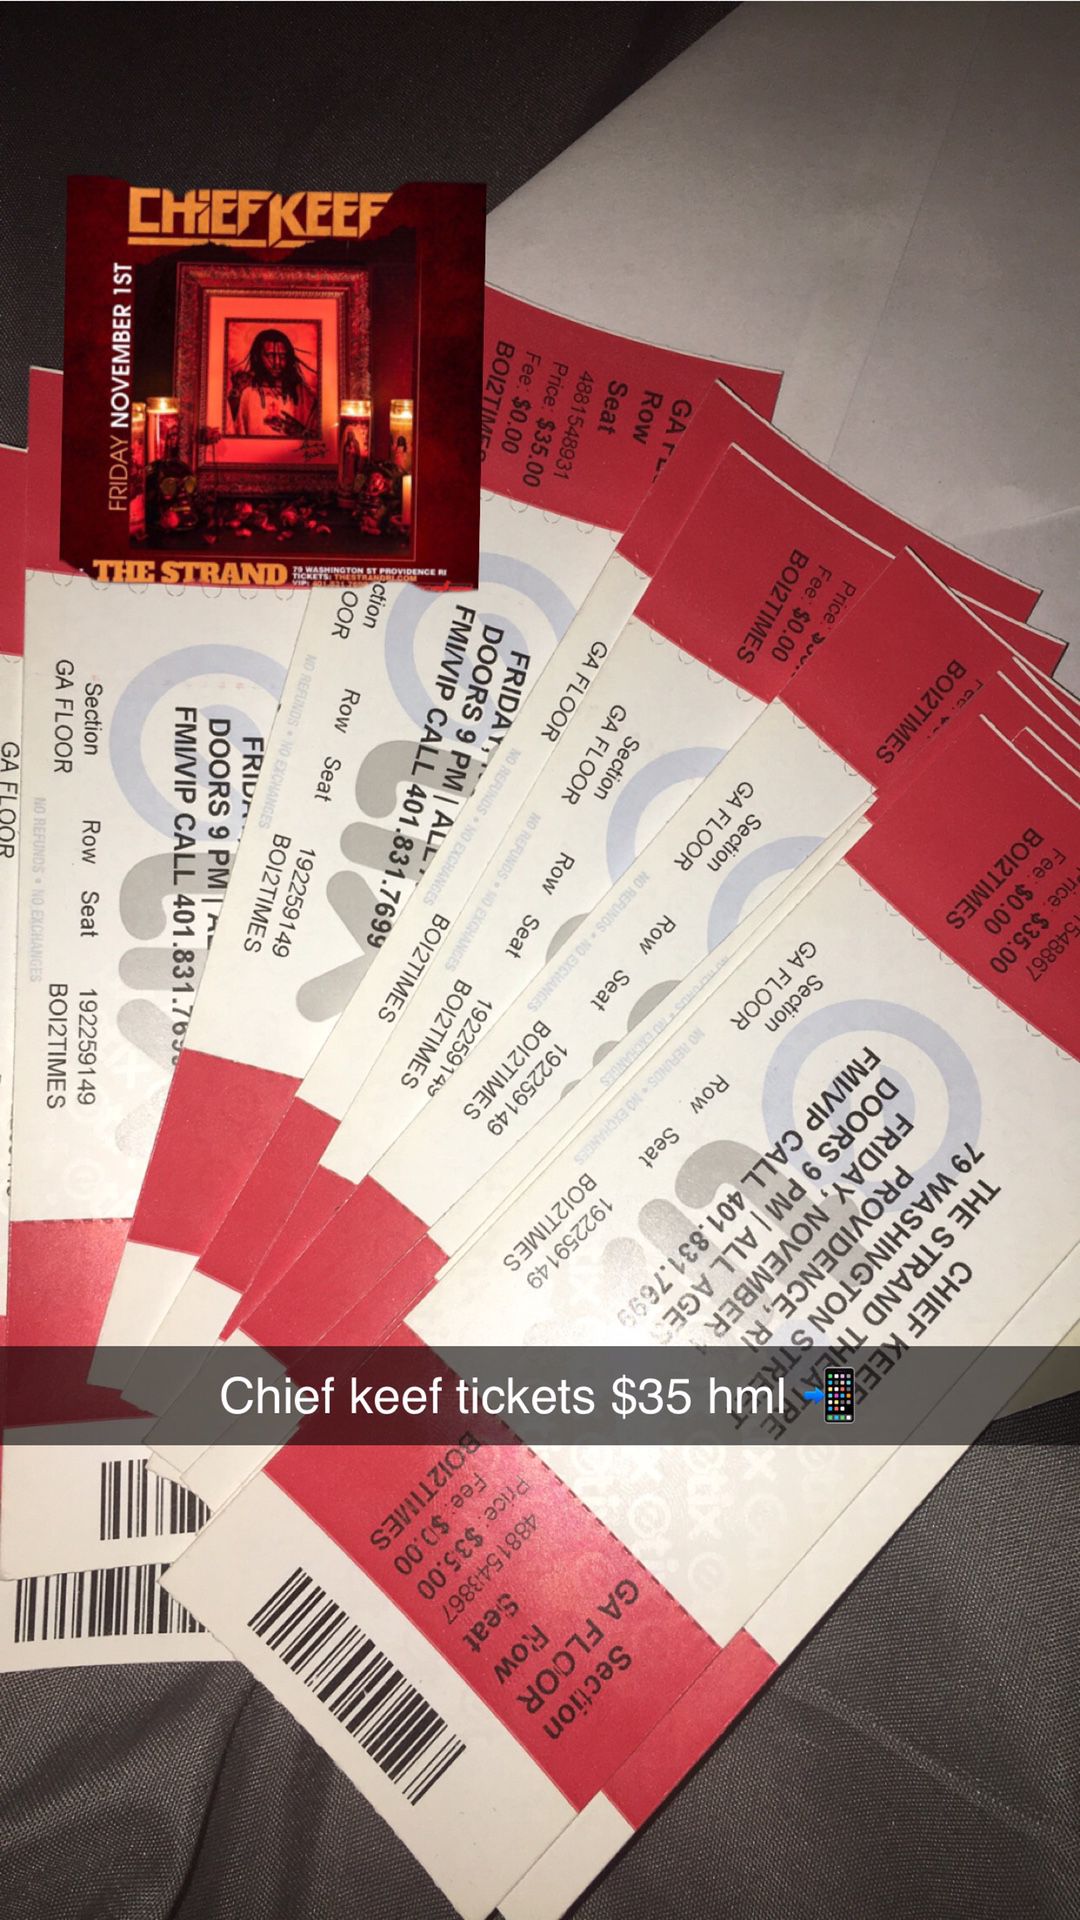 Chief Keef tickets